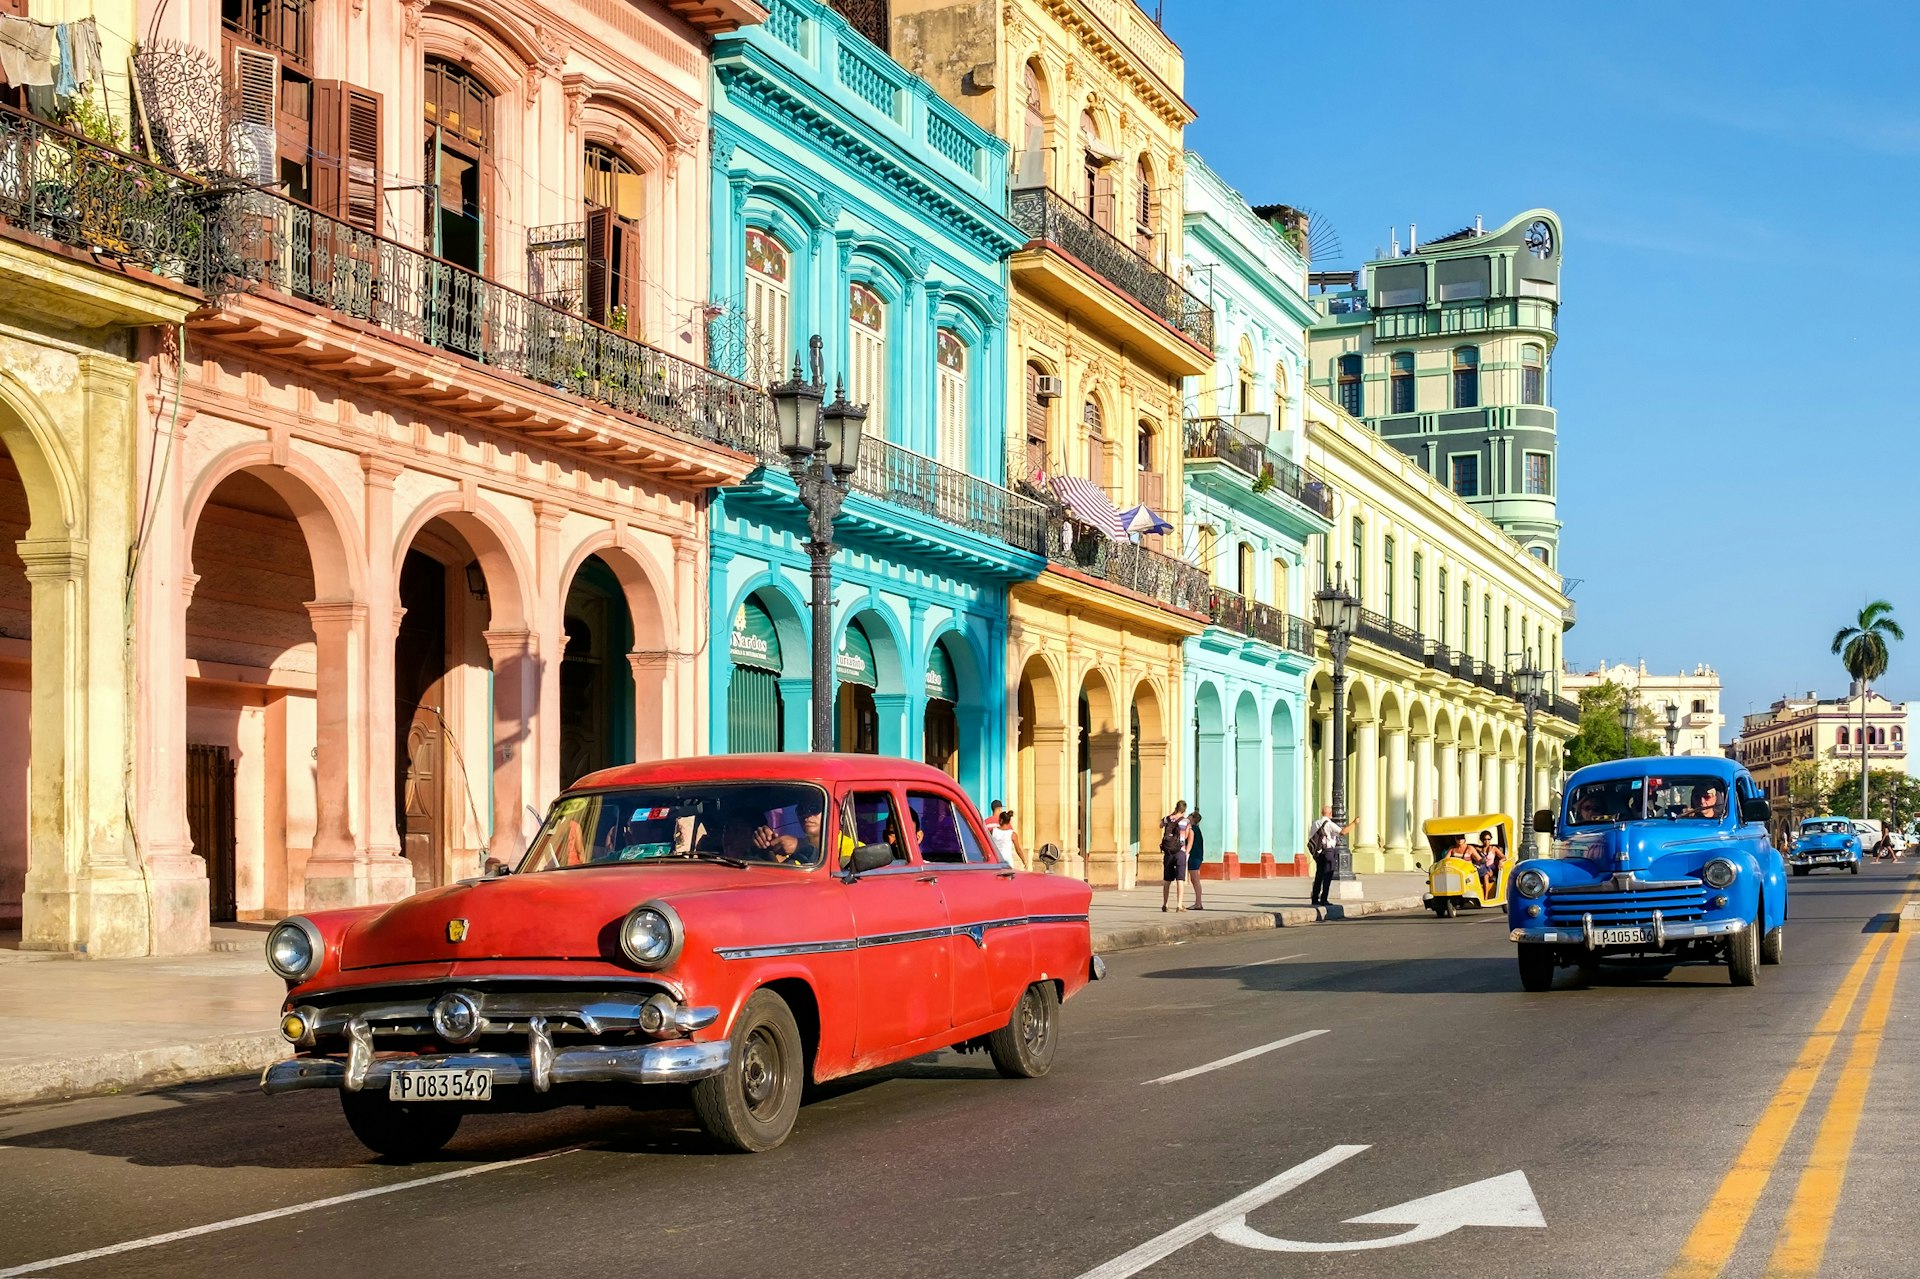 A run-down looking classic American car drives down a street in Havana; the buildings are well preserved and vibrantly colored.